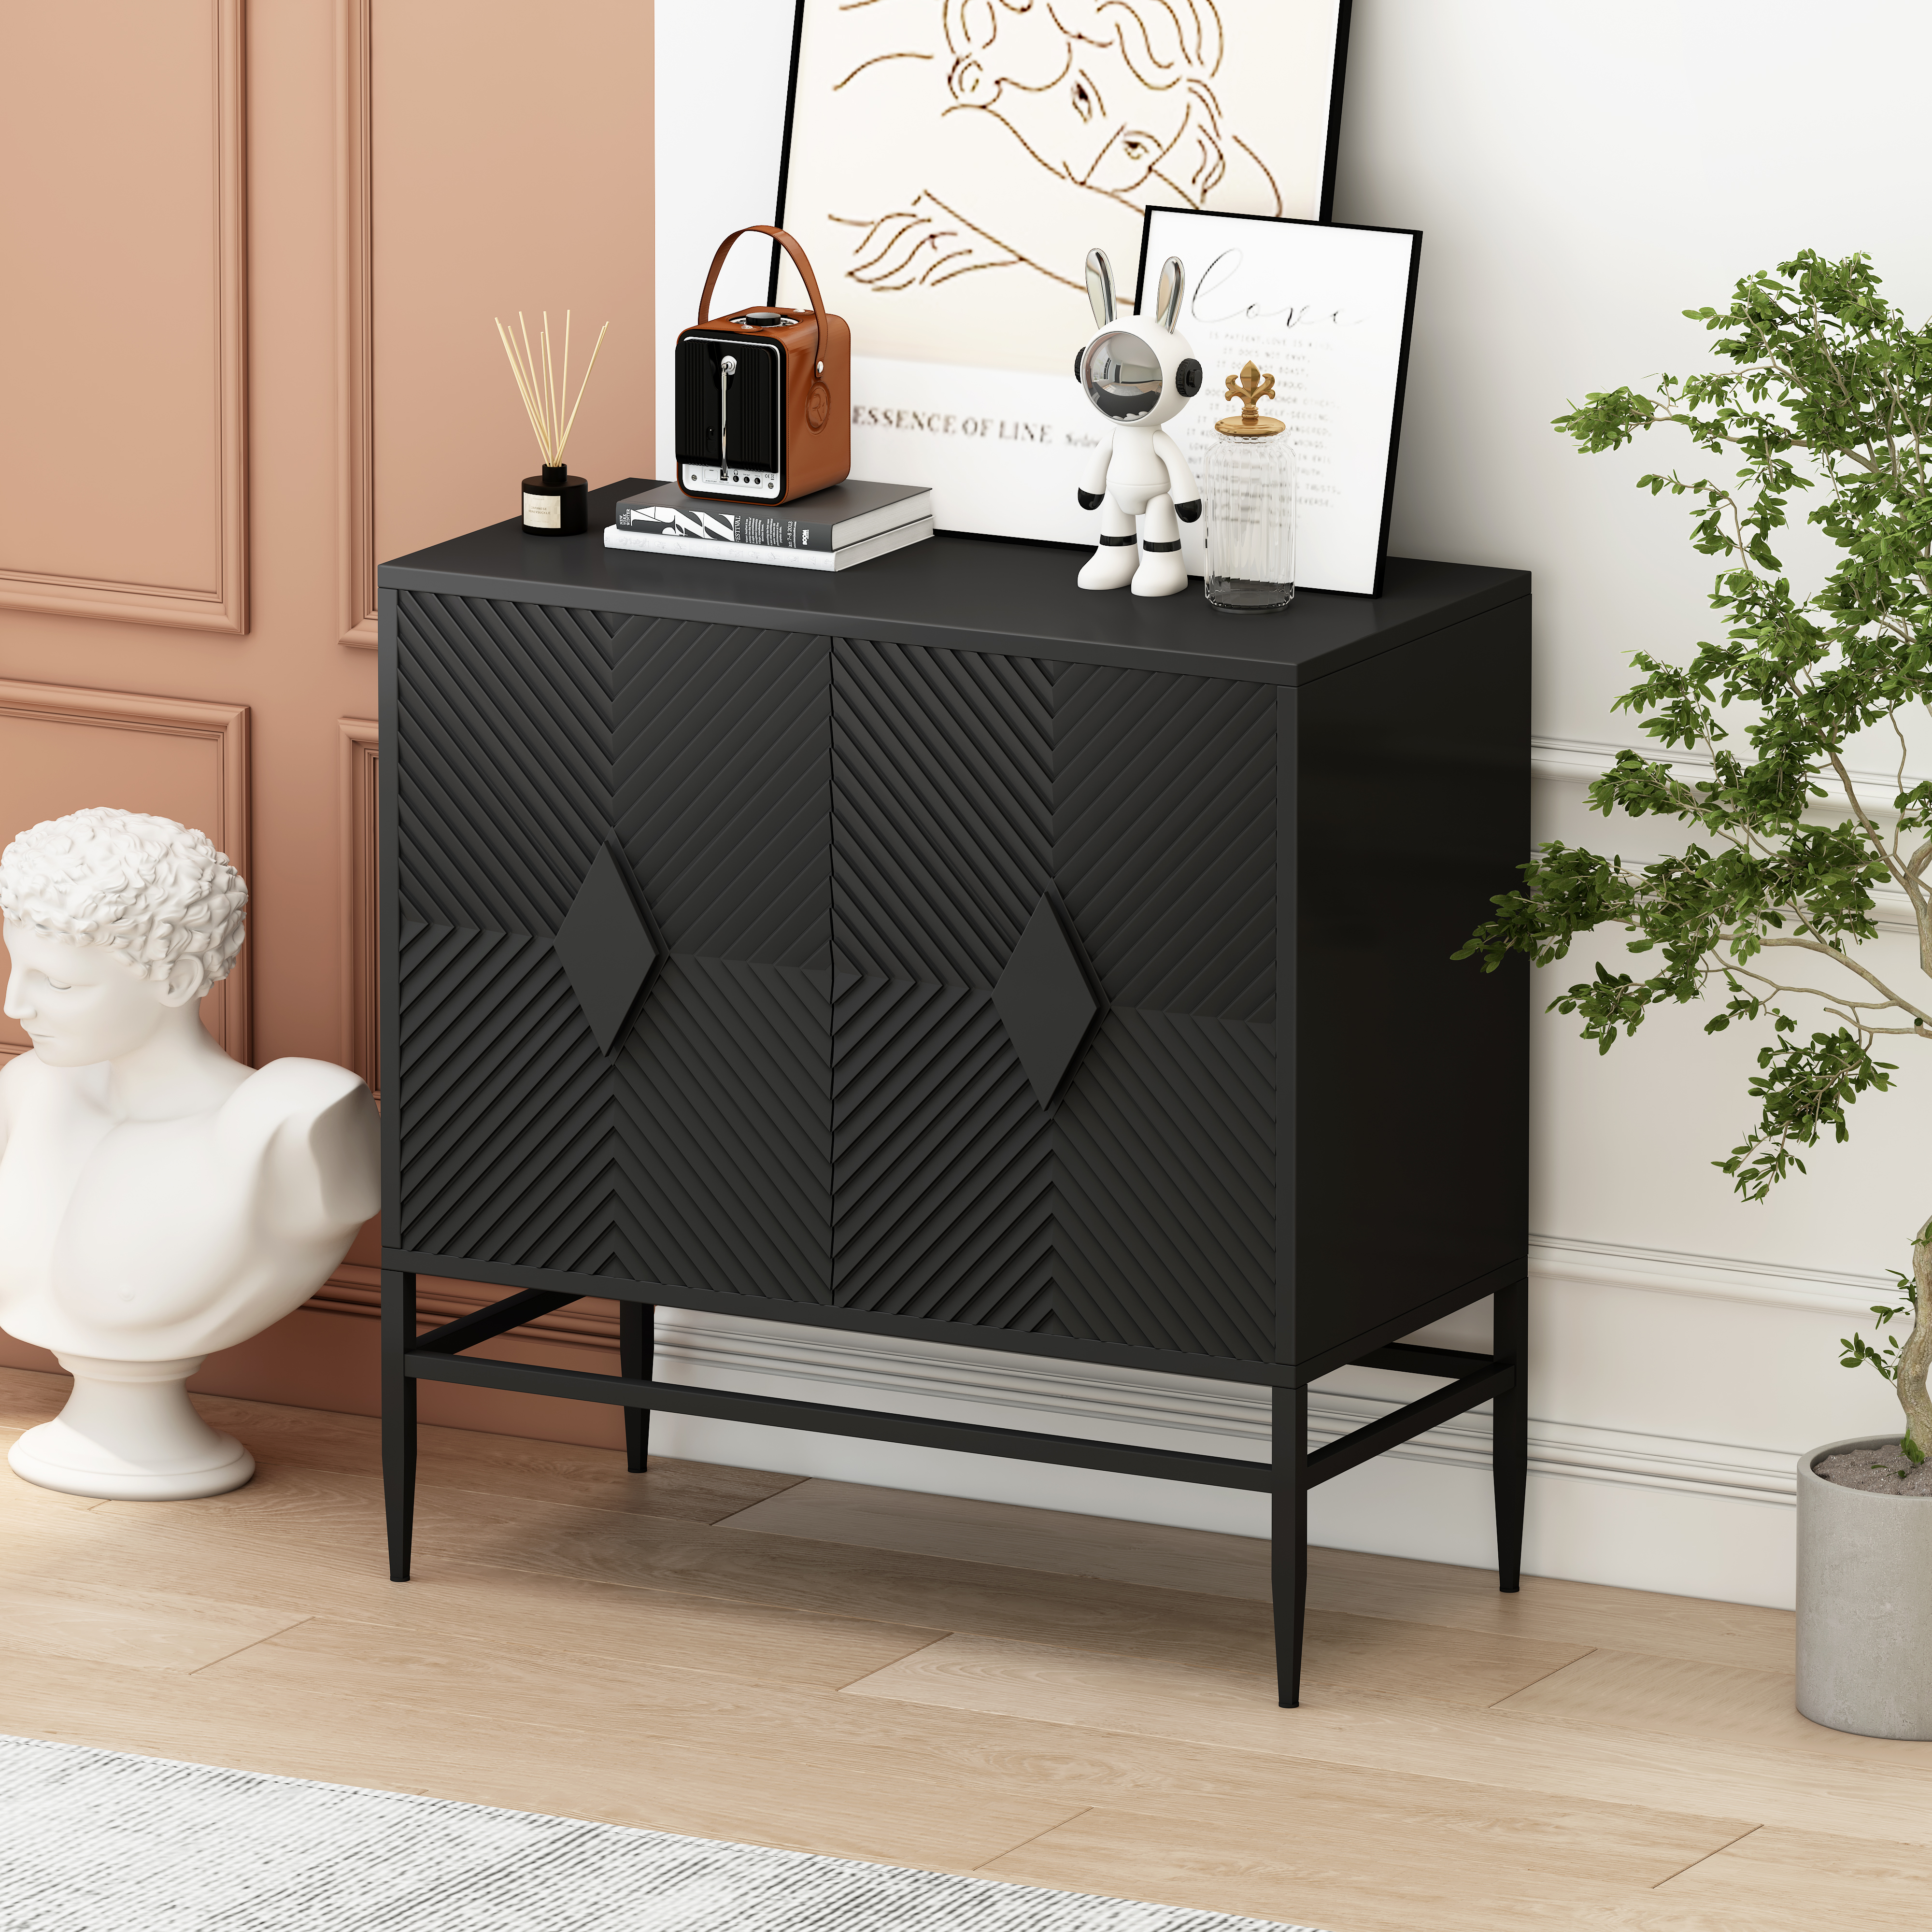 31.50" Modern 2 Door Wooden Cabinet with Featuring Two-tier Storage, for Office, Dining Room and Living Room, Painted in Black